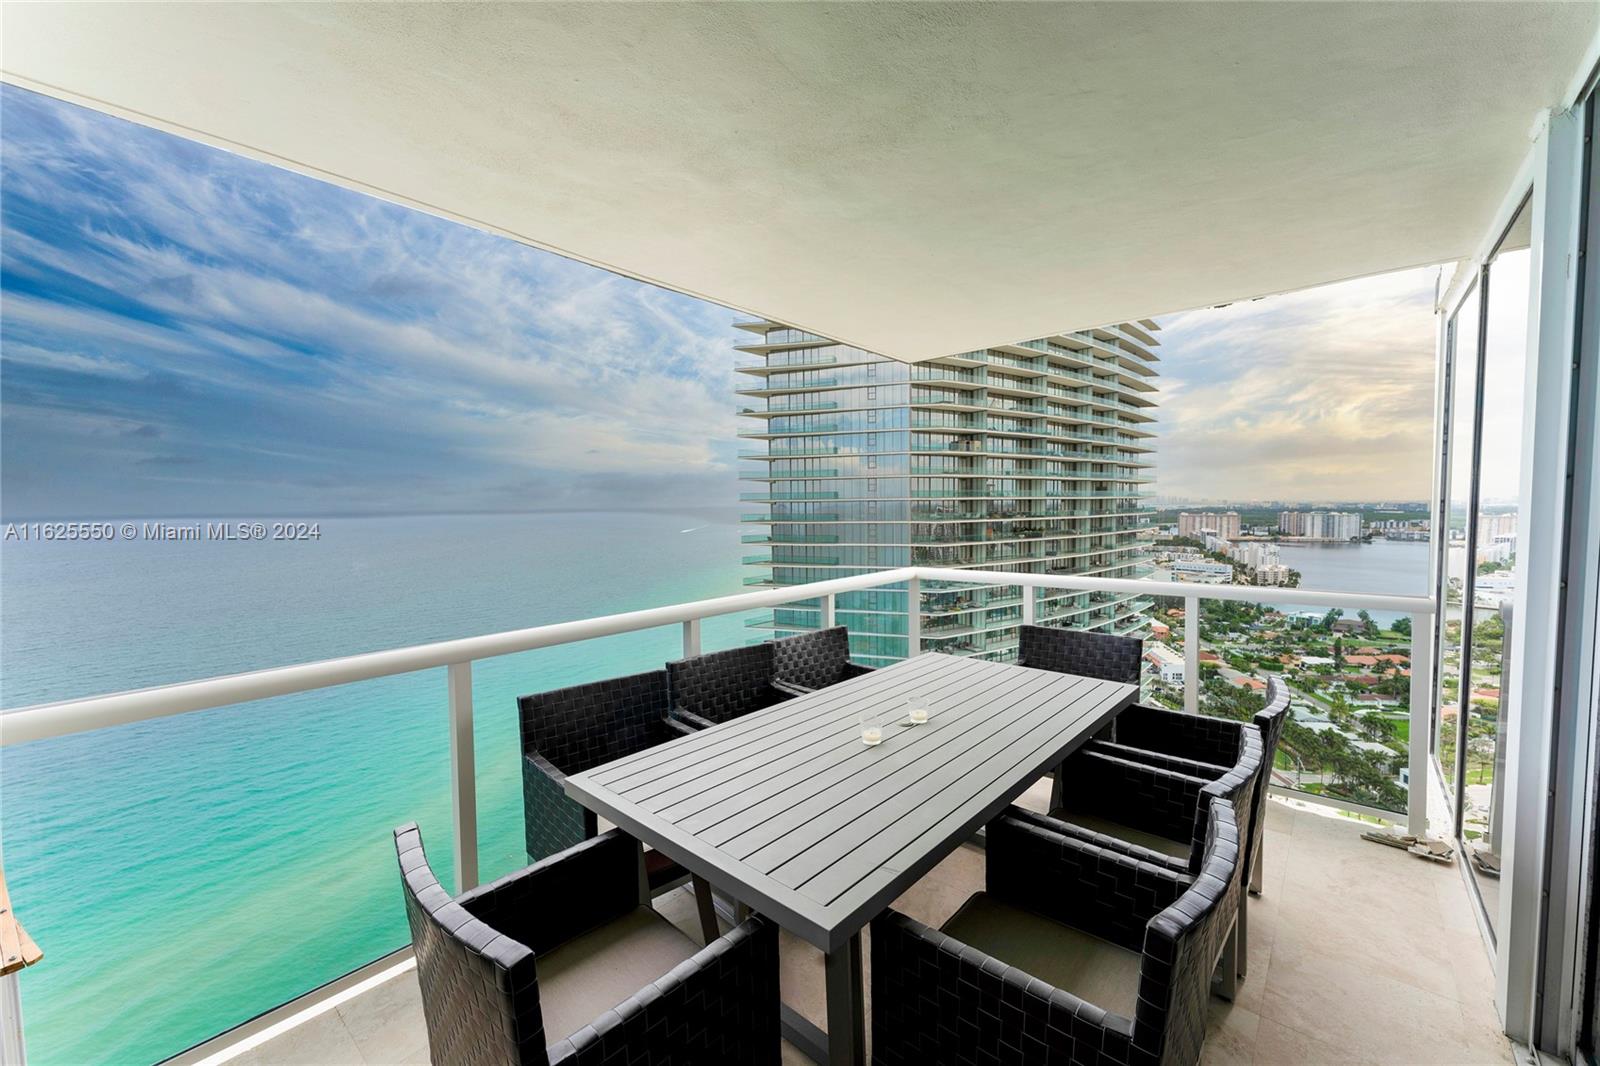 Amazing and unobstructed ocean views on this beautiful 36th floor apartment and recently remodeled unit at Ocean II. The 3 bedroom / 4.5 bath features a private elevator entrance,  newly done Snaideiro kitchen with Sub Zero and Wolf appliances.  Enjoy the sunrise and sunset with 2 balconies facing direct ocean and intercoastal panoramas. Amenities include full service beach,  two tennis courts, a pool right on the beach, a restaurant, state of the art gym, a sauna, and party room.